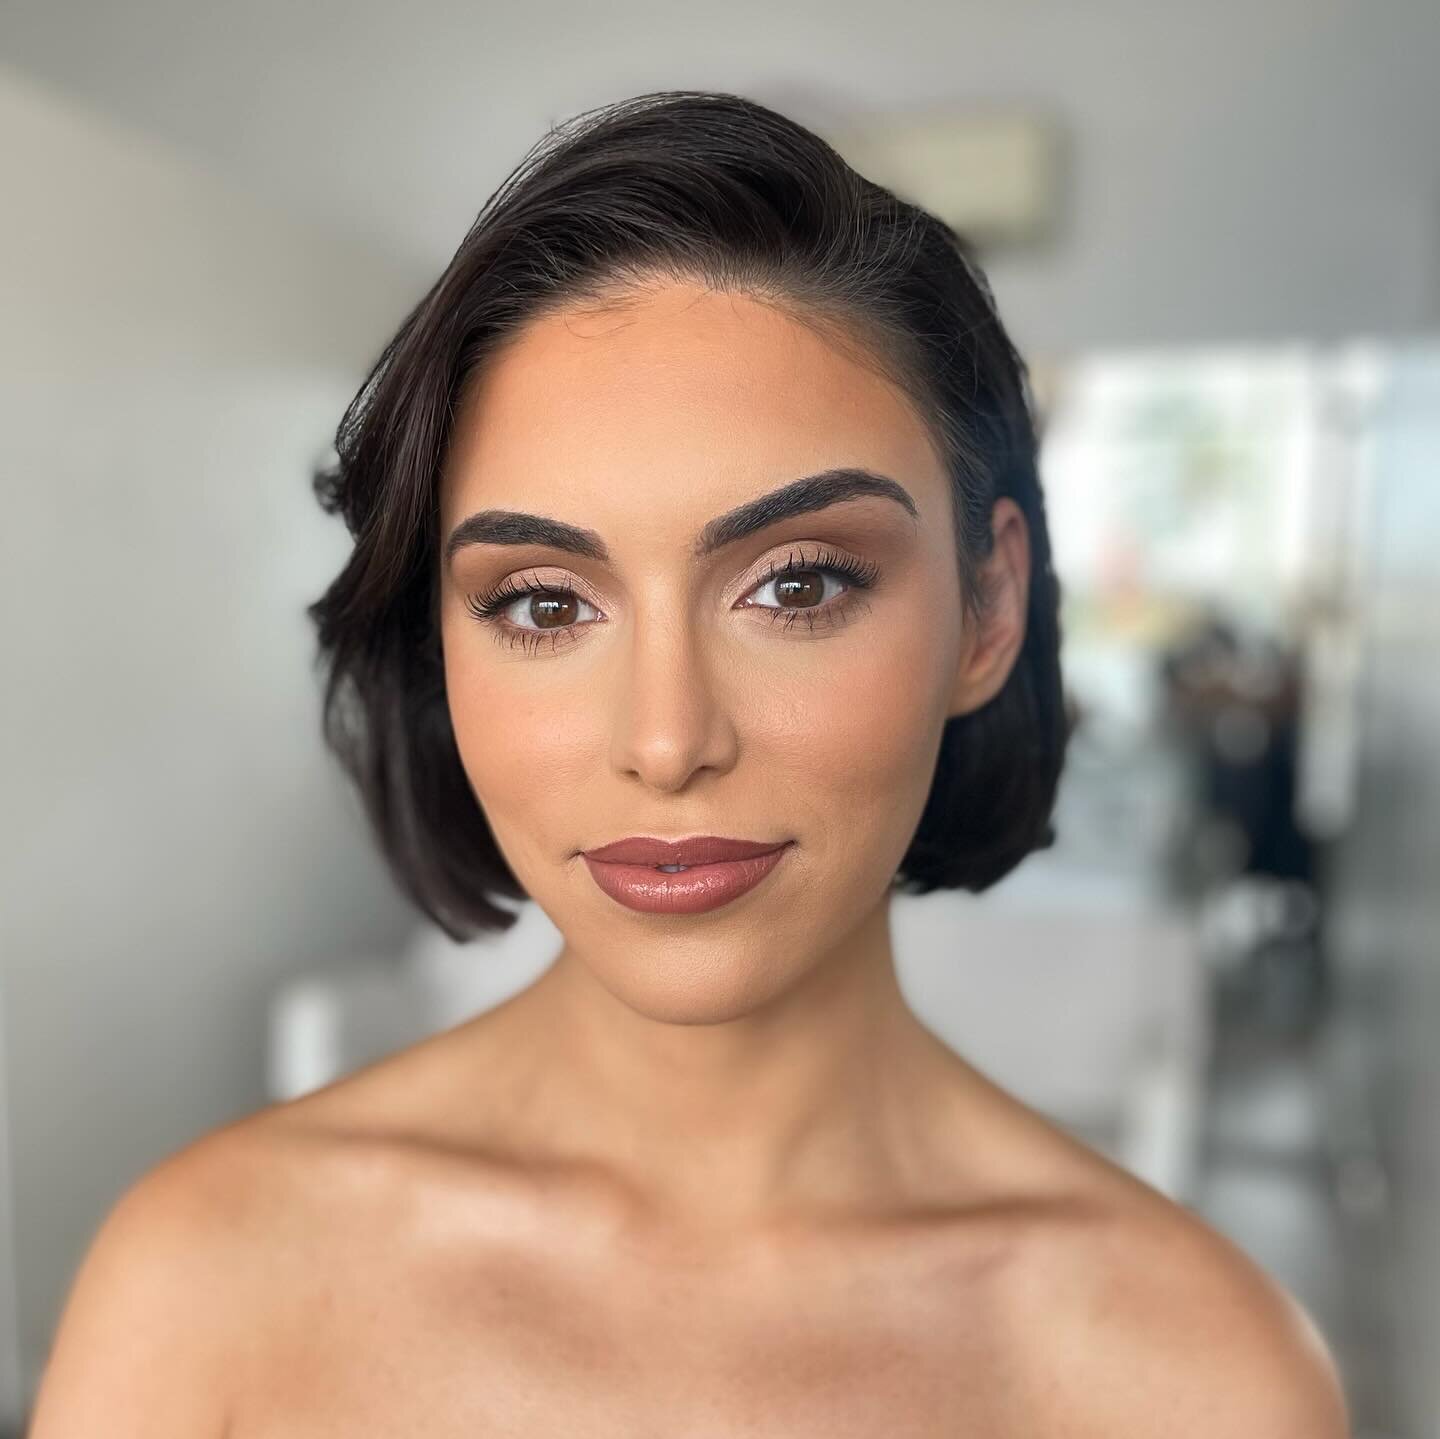 Obsessed with this Makeup look! 🔥🔥

#makeupmelbourne #melbourneweddings #melbourneweddingstylist  #melbournemakeupartist #melbournehairdresser #melbournemau #melbournehairstylist #melbournehair #formalglam #formalmakeup #melbournesalon #melbournewe